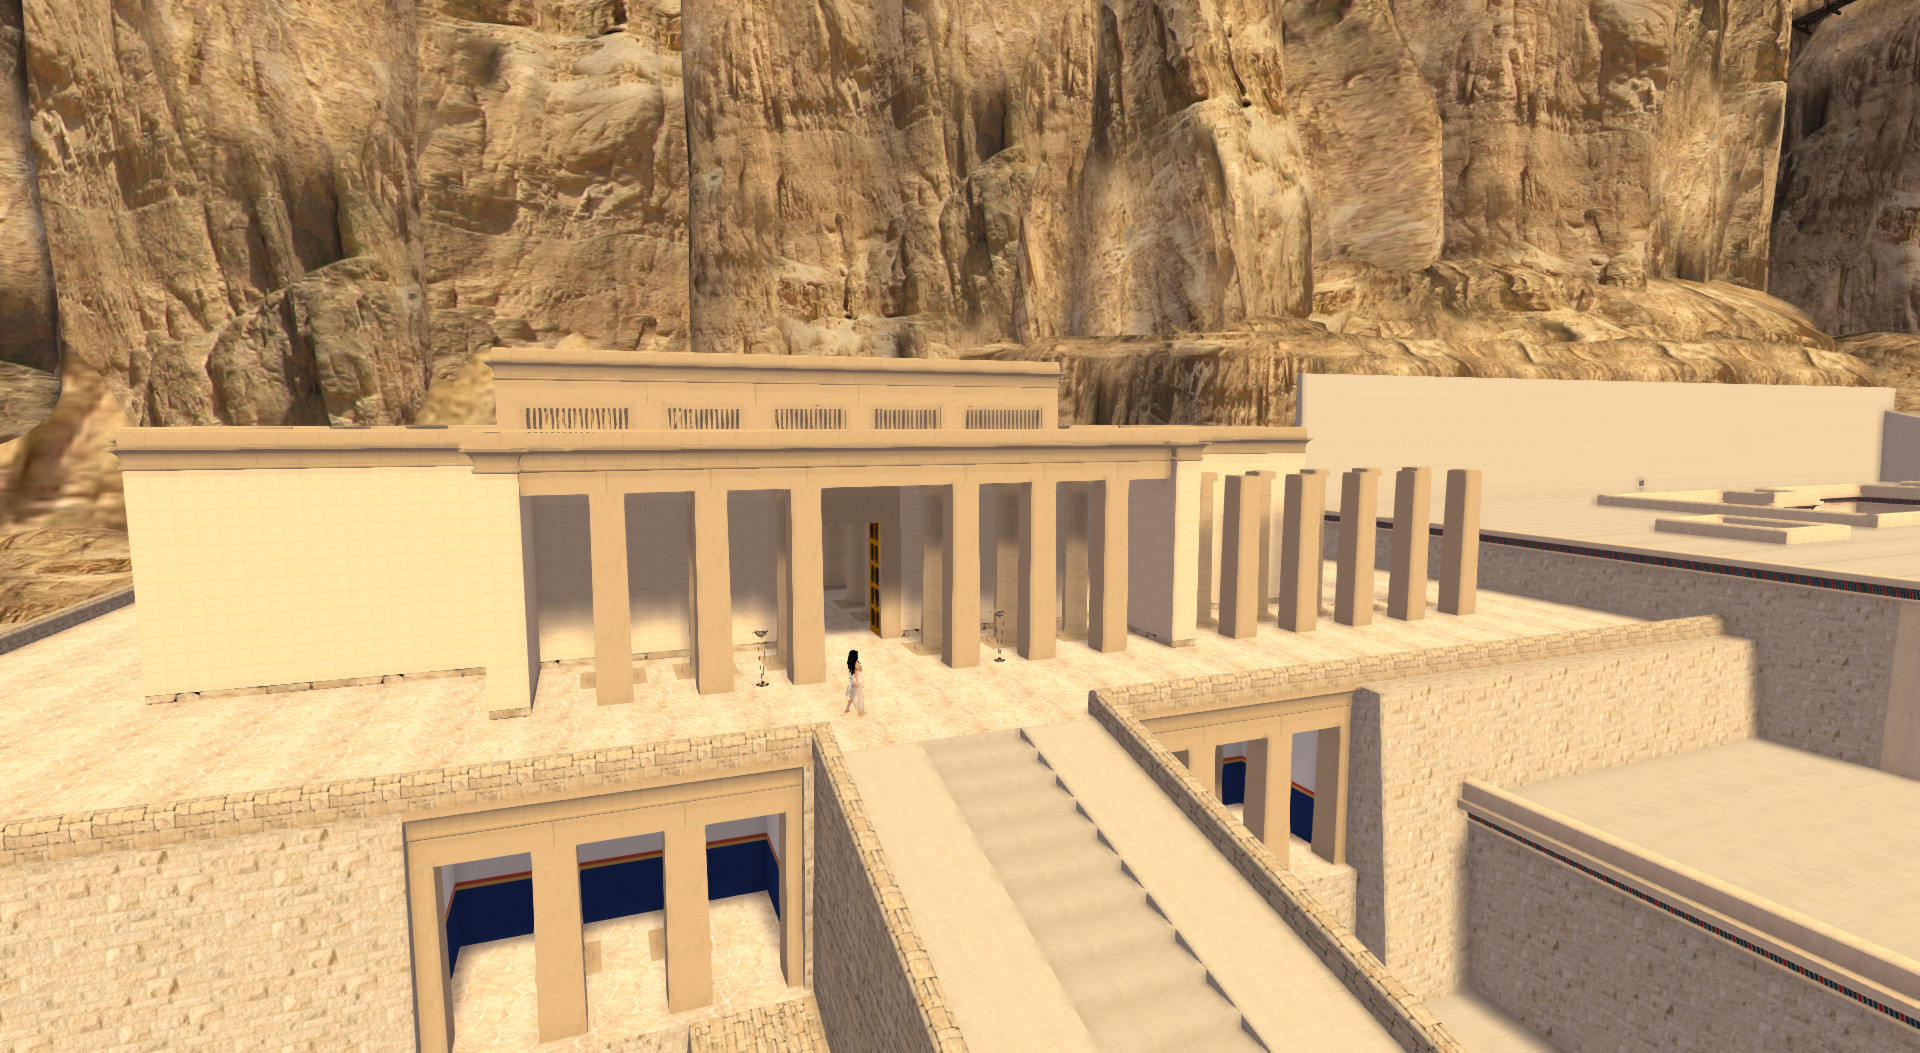 Thutmose III temple, reconstruction due to new insights from Campaigns 2012-2013